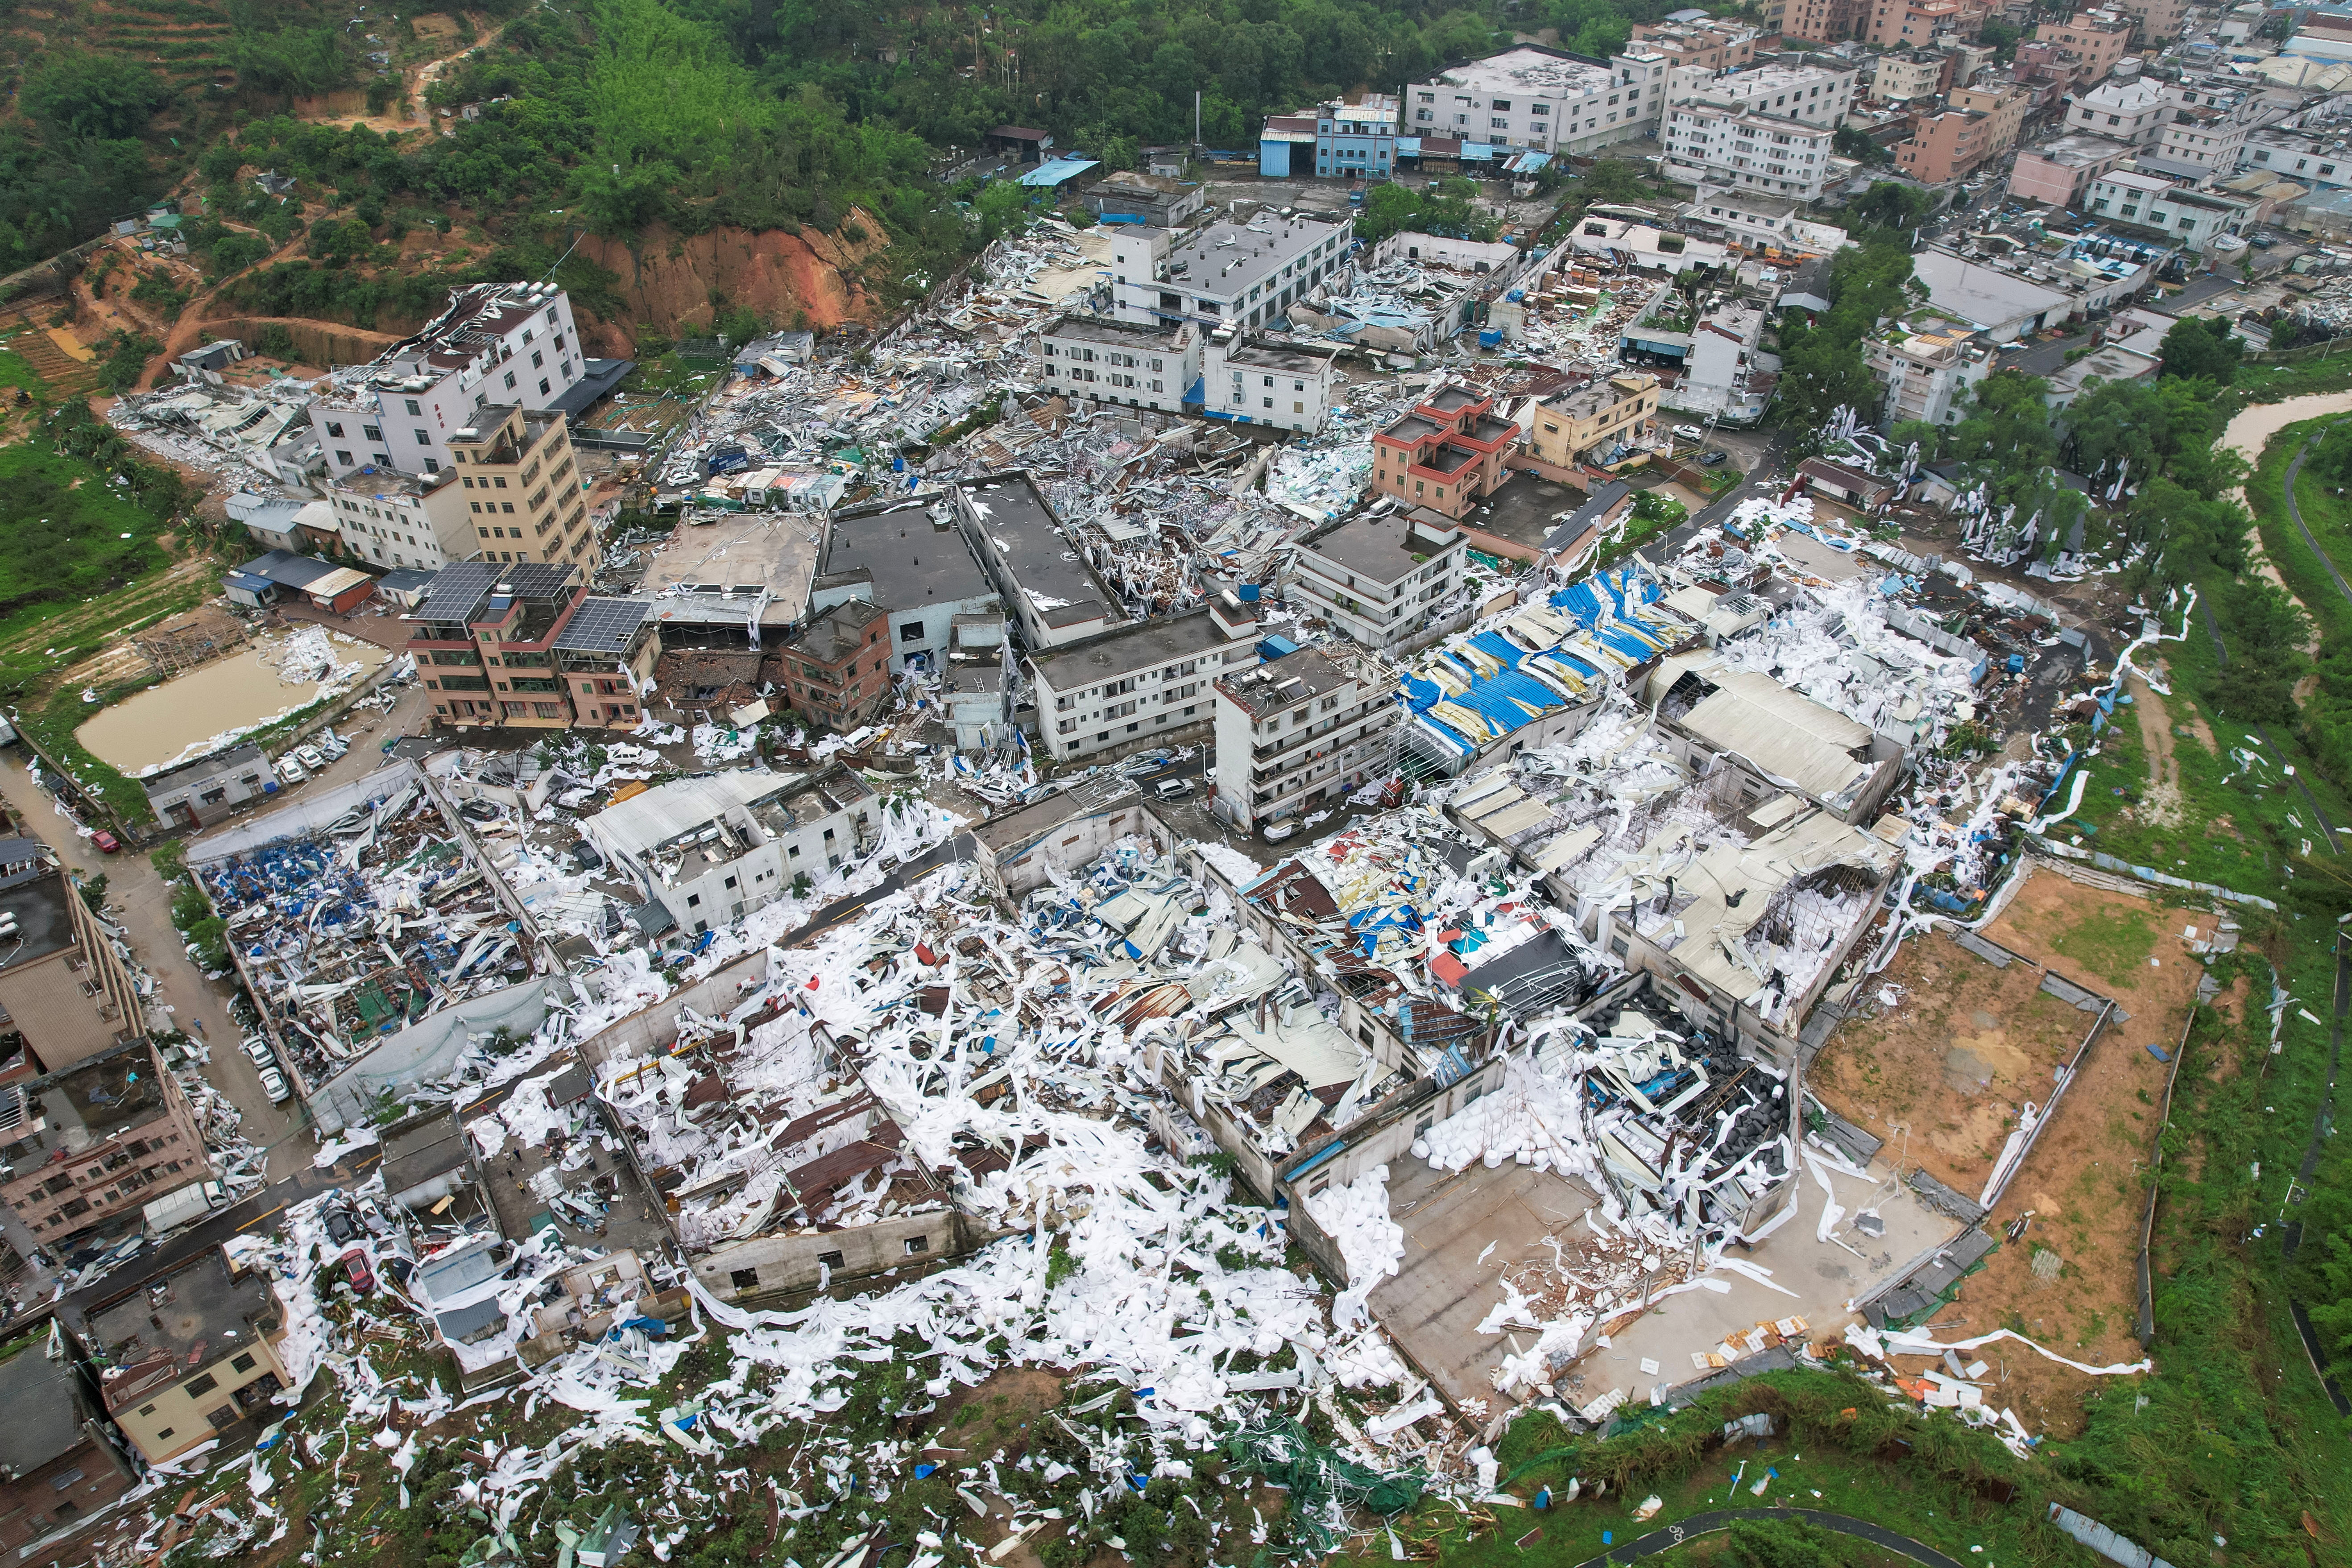 Drone view shows damaged buildings following a tornado at a village in Guangzhou